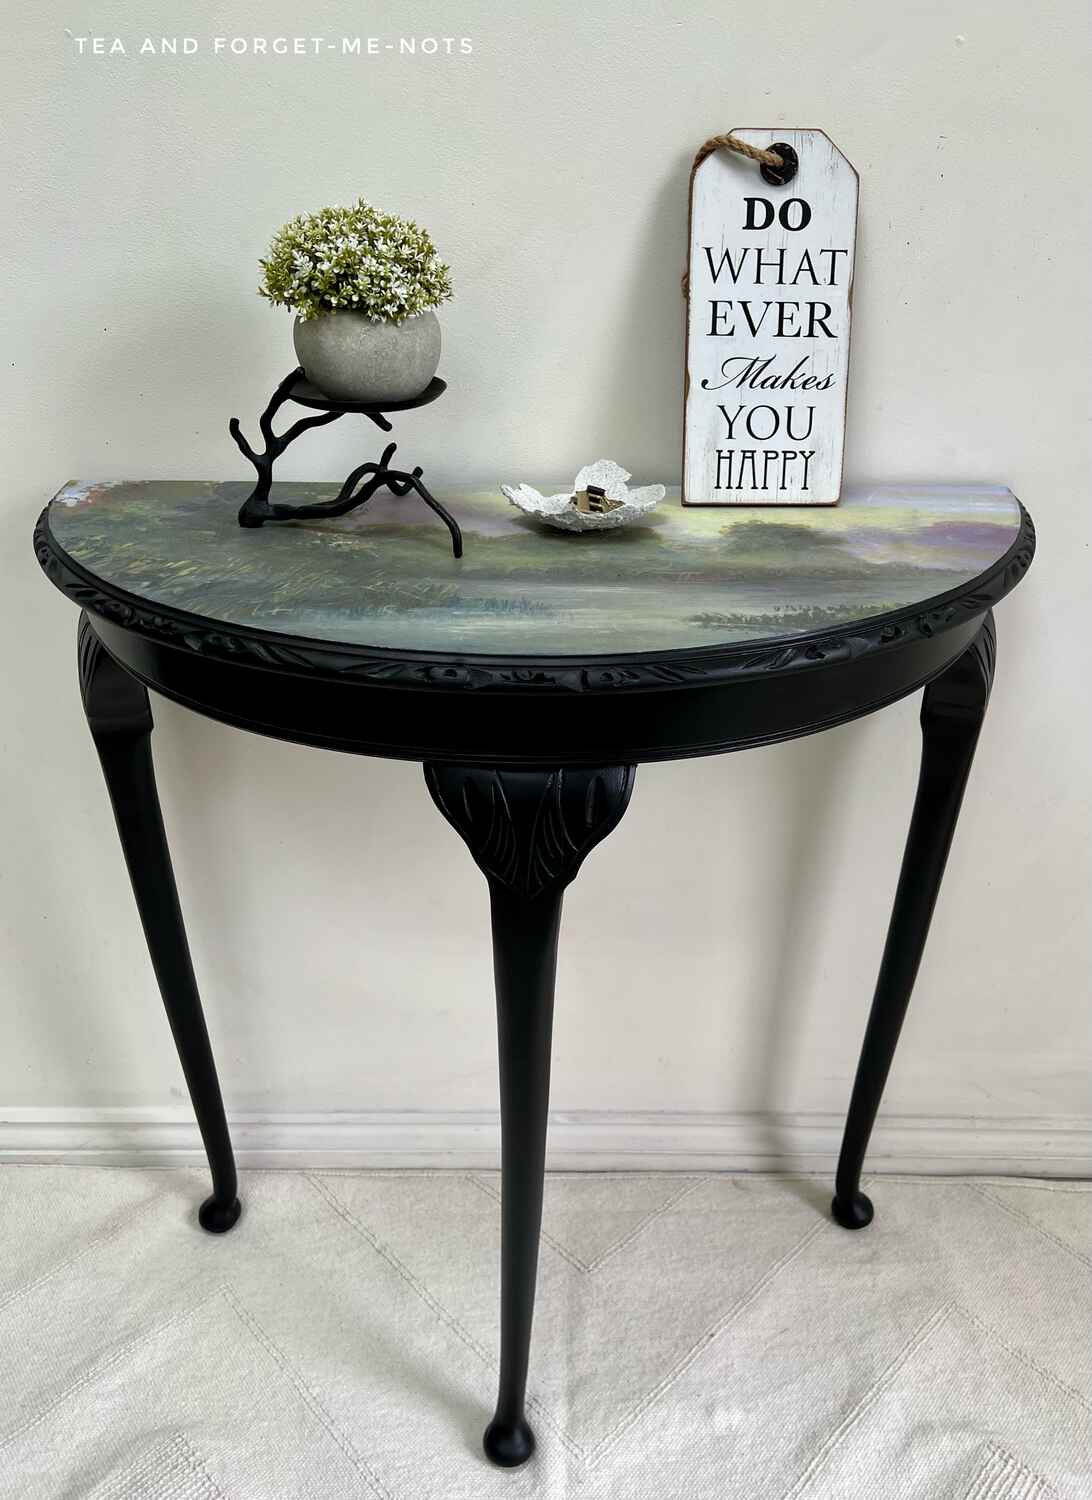 How to paint wood furniture black successfully – Tea and Forget-me-nots